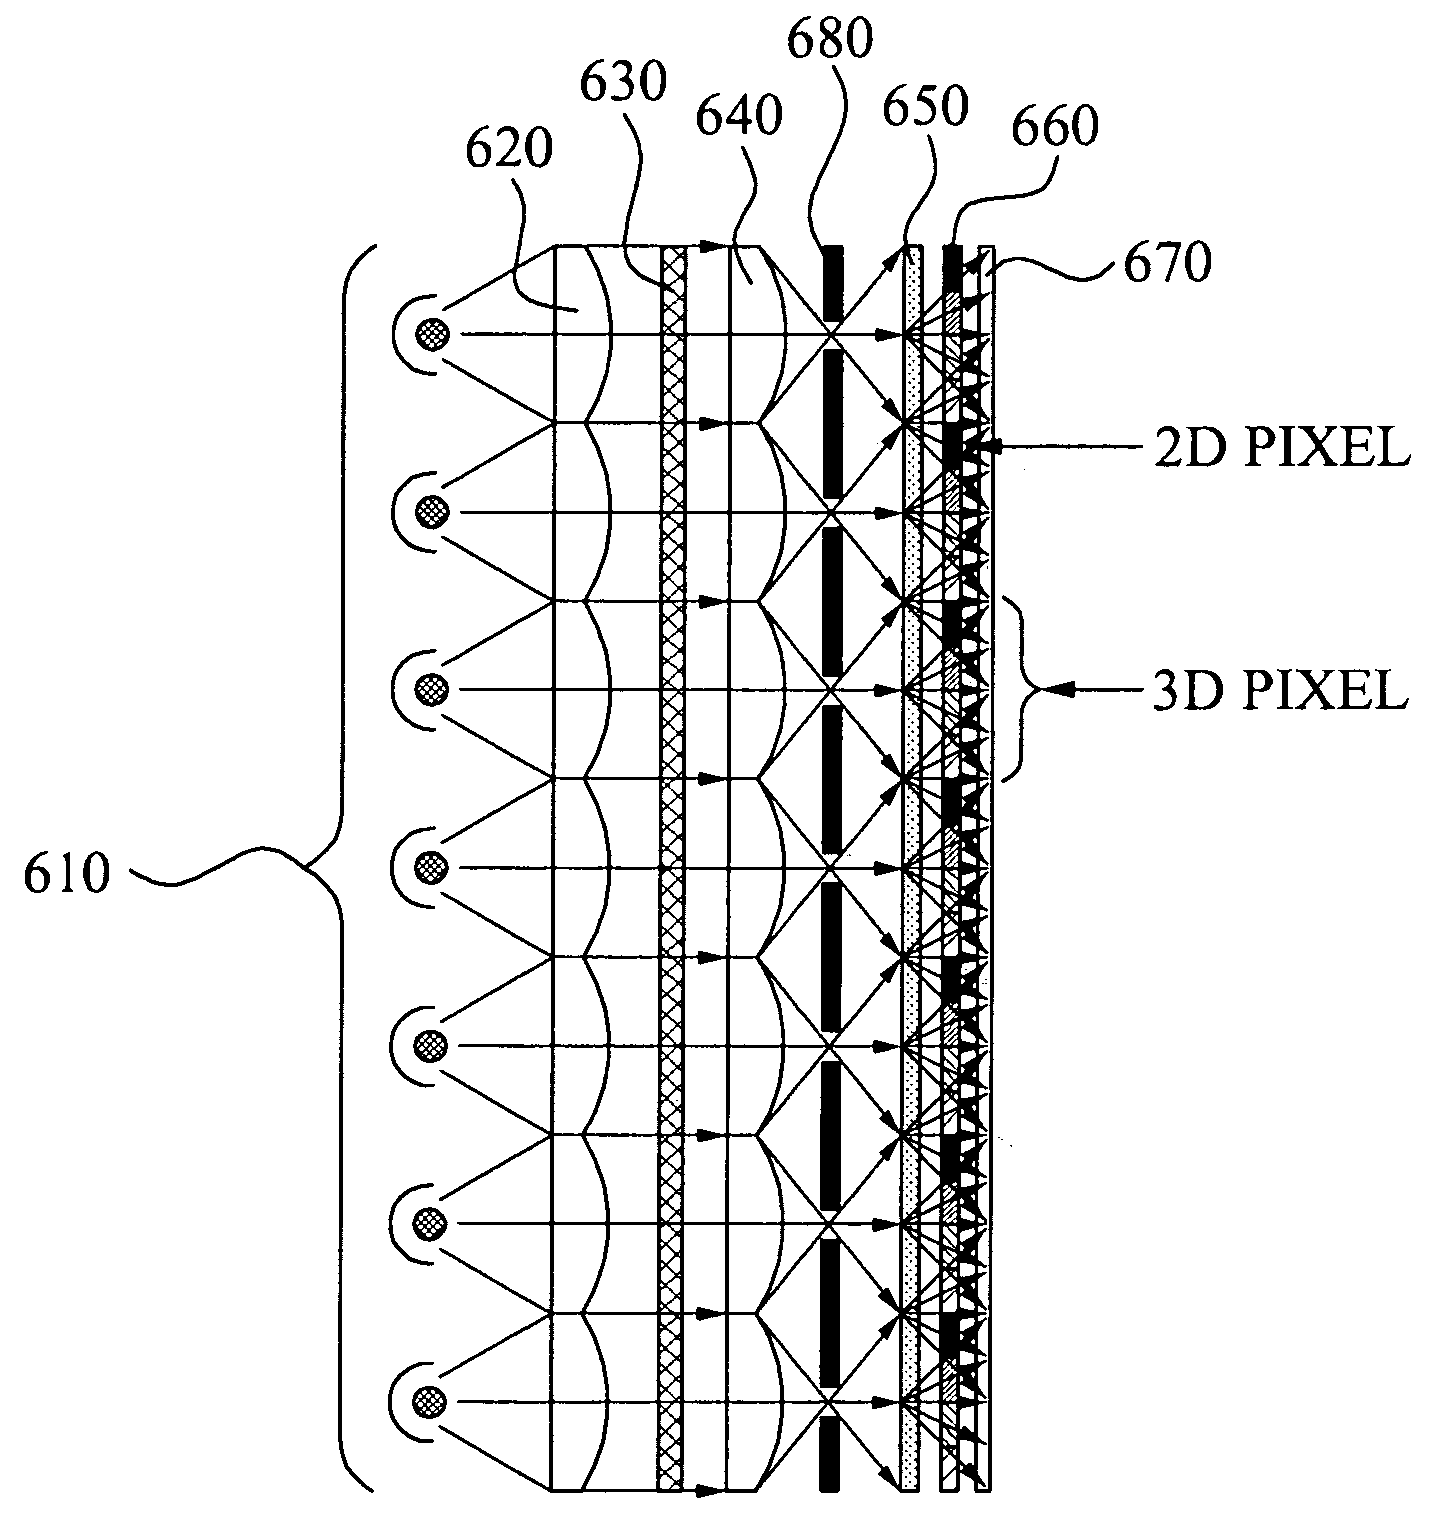 Apparatus and method for 2D and 3D image switchable display